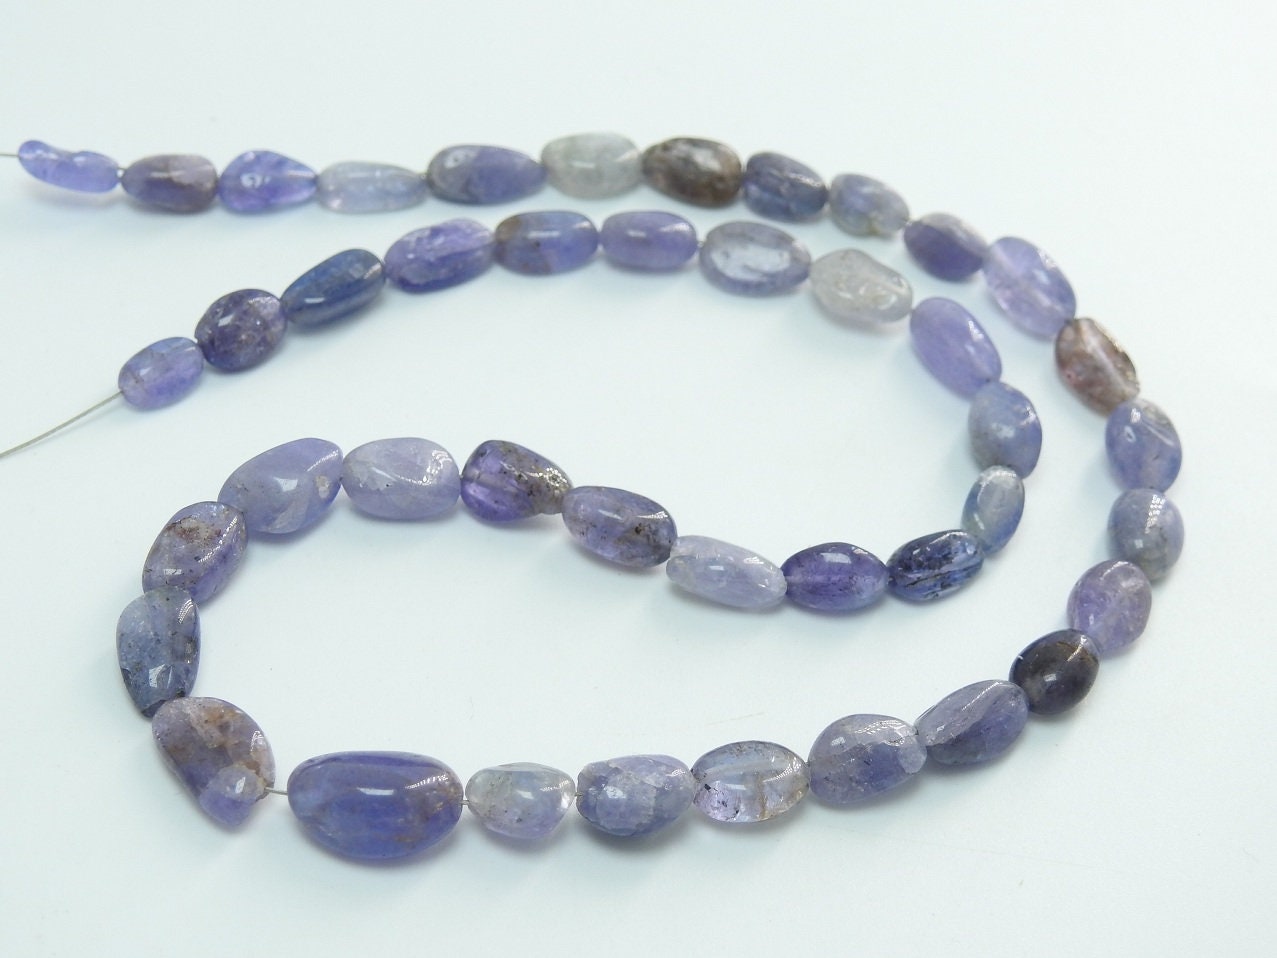 Natural Blue Tanzanite Smooth Tumble,Nuggets,Loose Stone,Handmade Bead,For Making Jewelry,Wholesale Price New Arrival 14Inch Strand (TU5) | Save 33% - Rajasthan Living 18